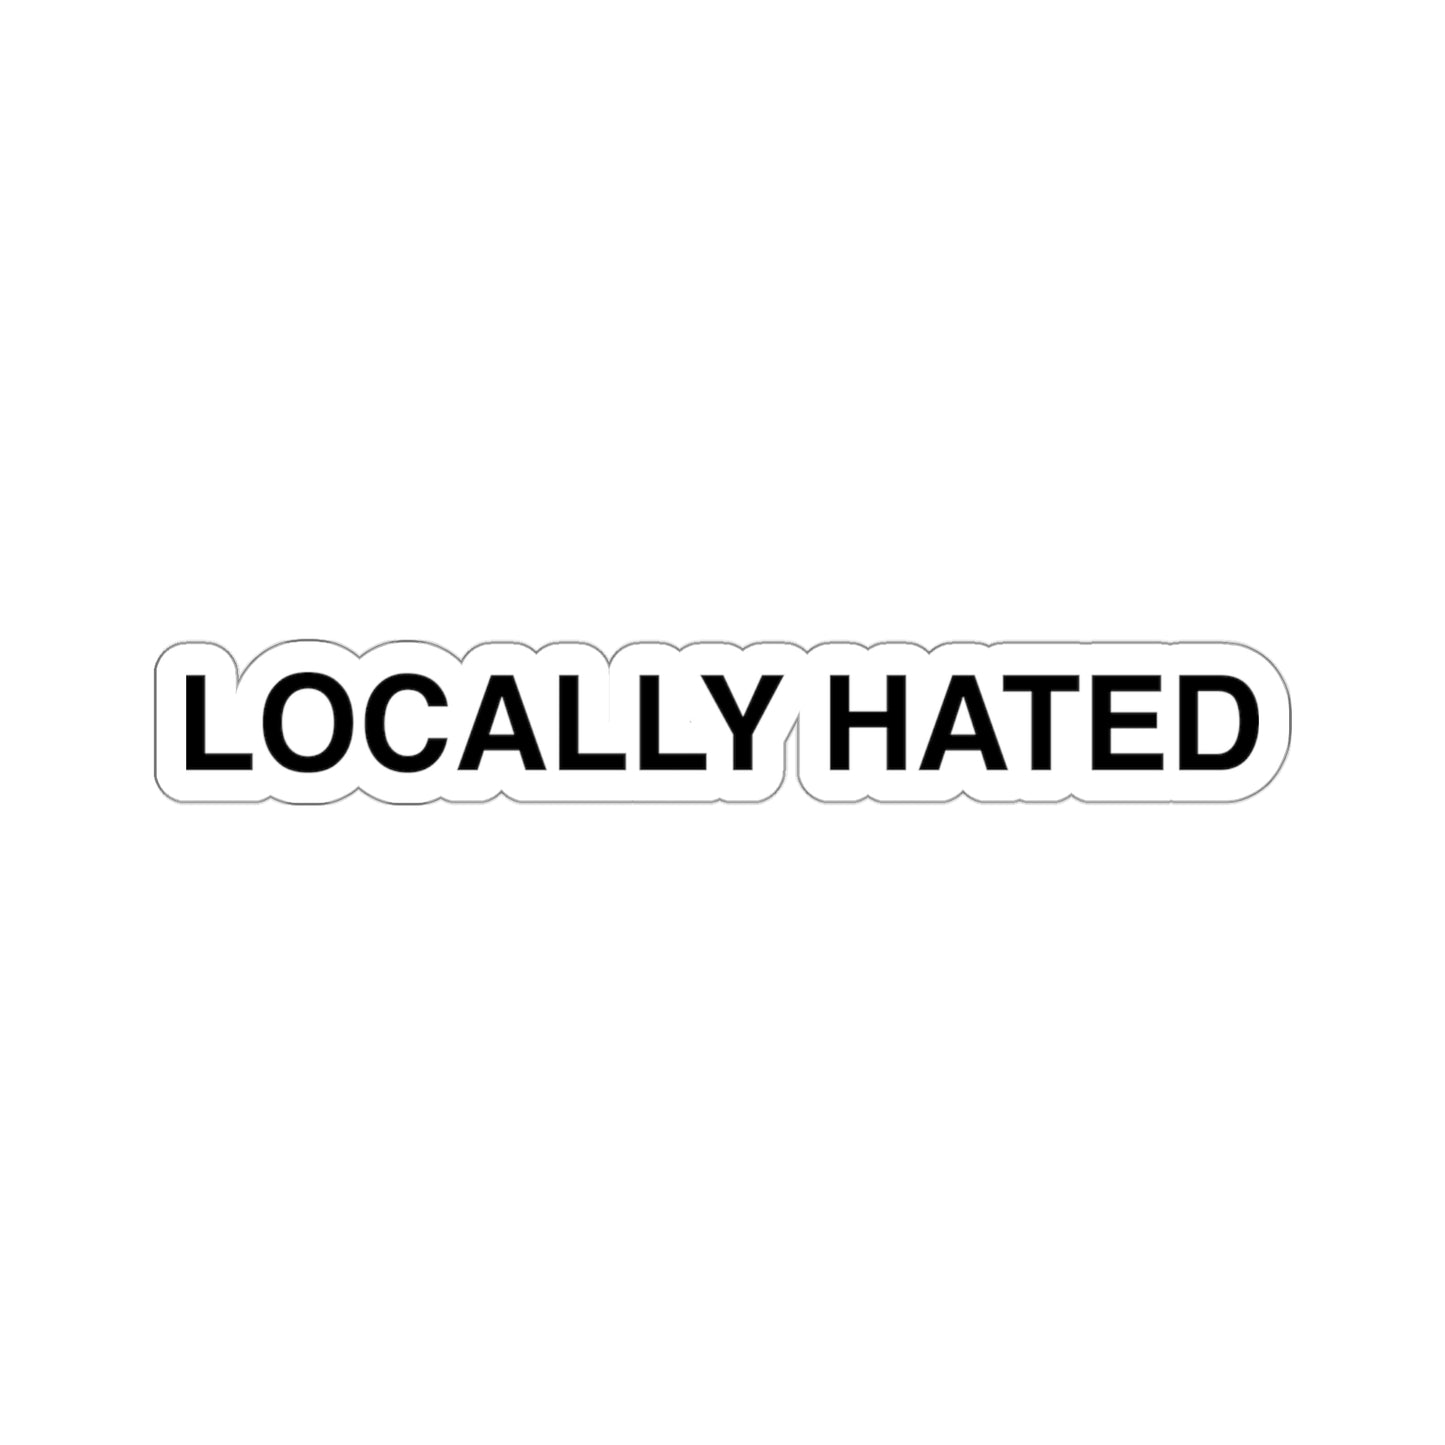 Locally Hated, Funny Meme Sticker